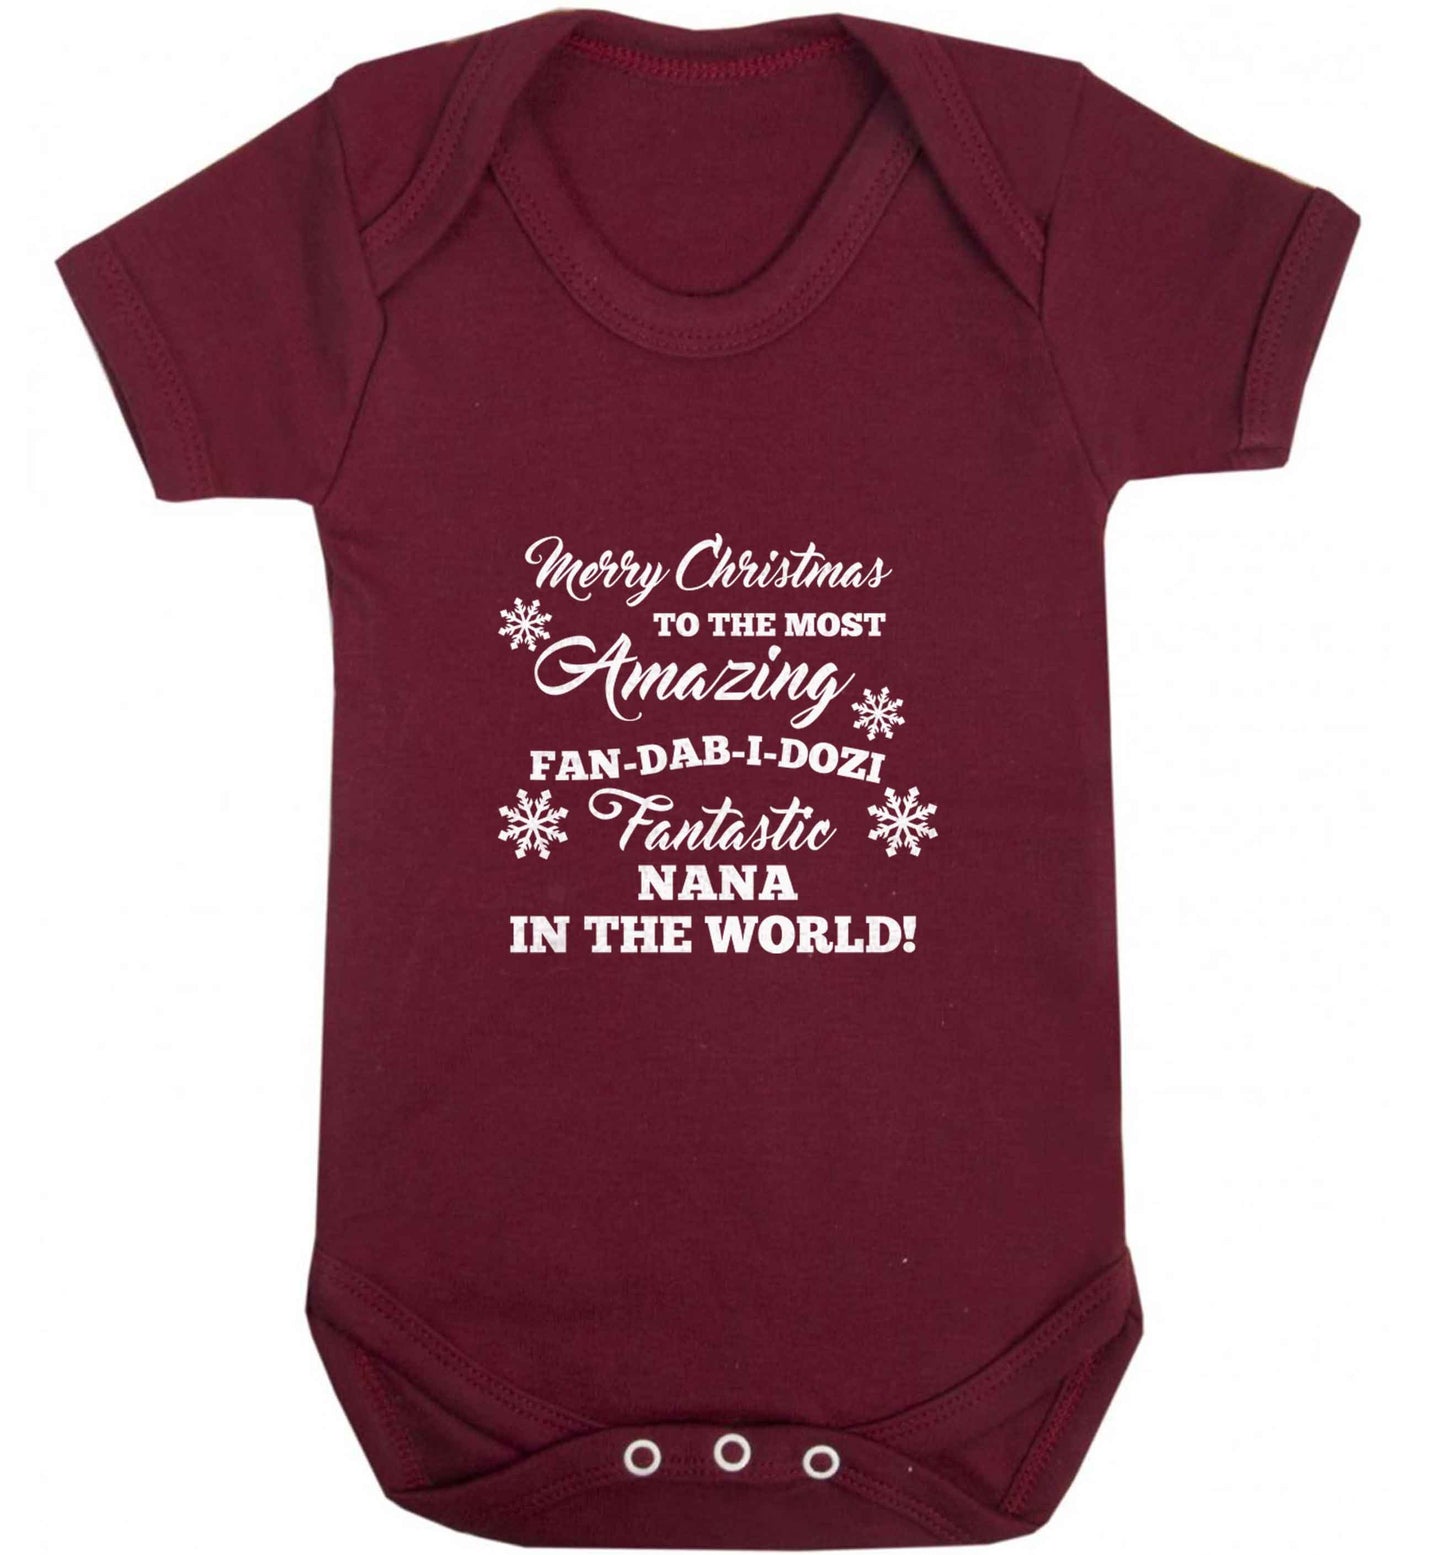 Merry Christmas to the most amazing fan-dab-i-dozi fantasic Nana in the world baby vest maroon 18-24 months